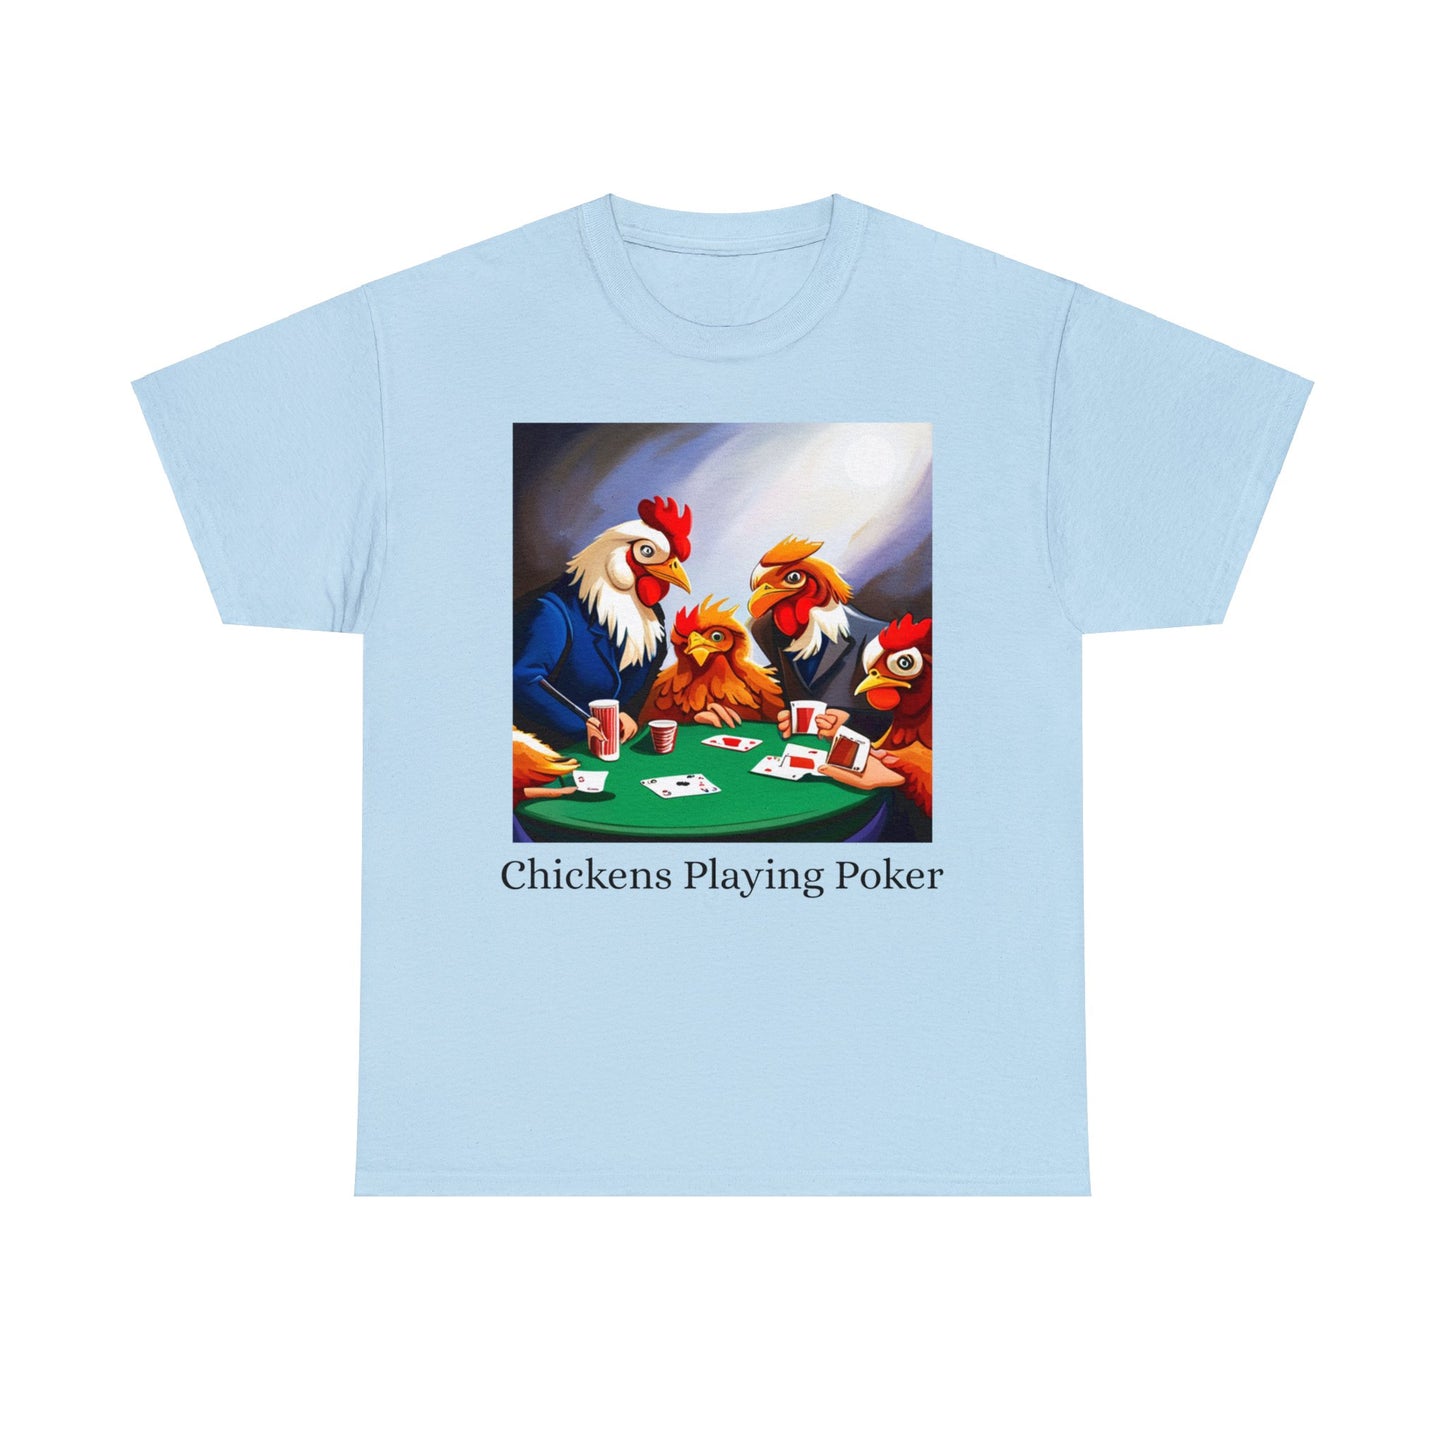 Chickens Playing Poker